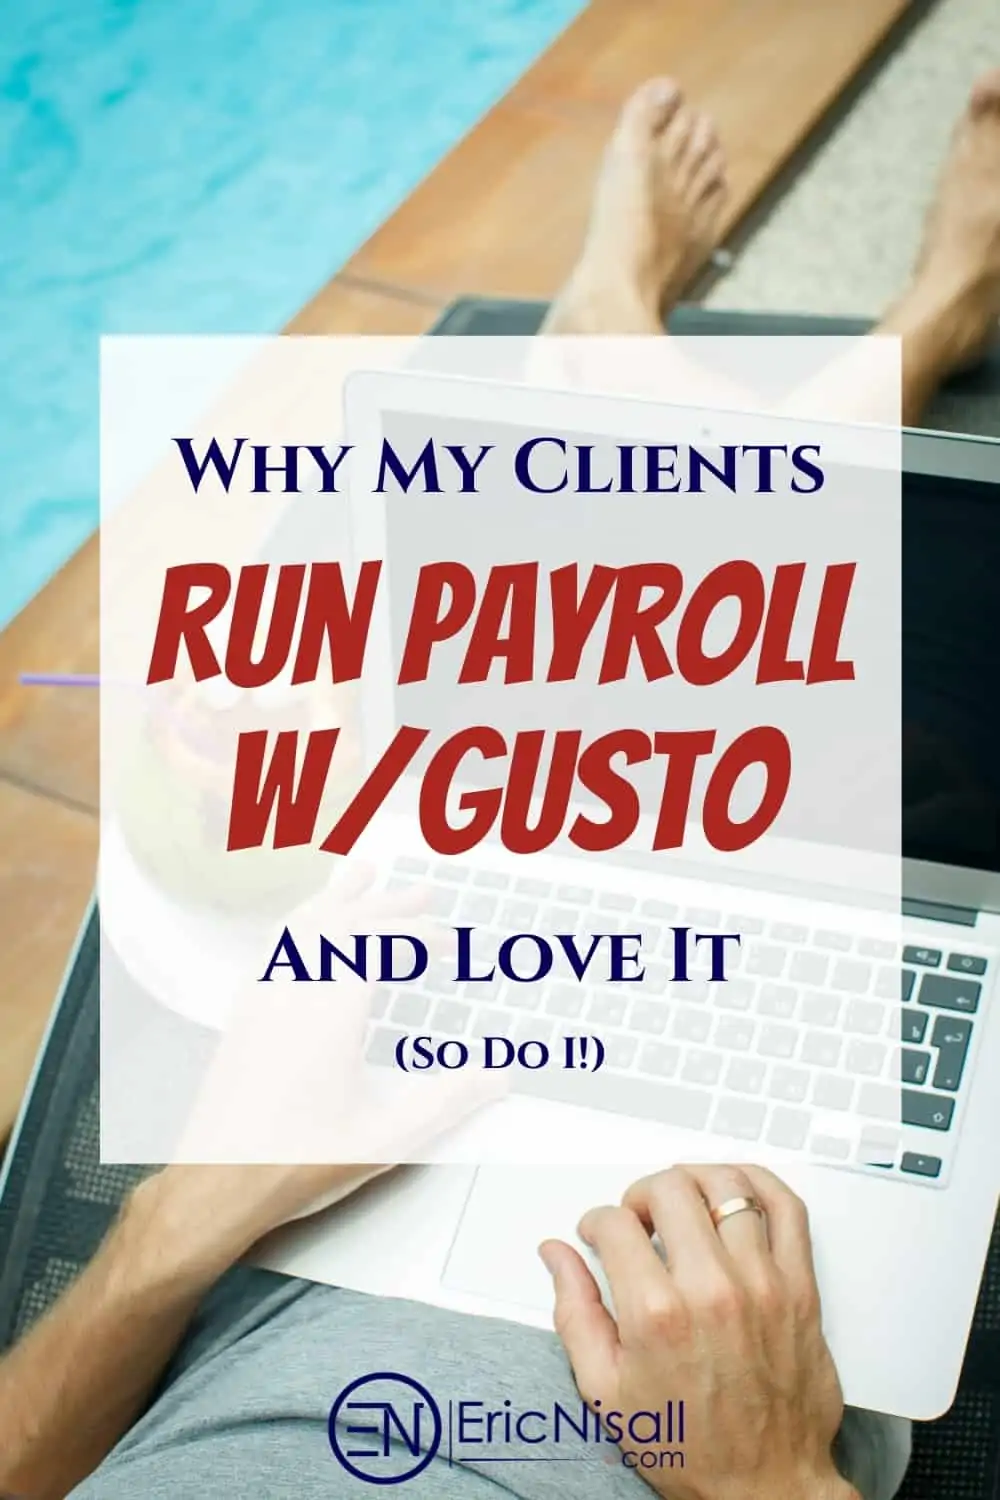 It can be time-consuming and intimidating to run payroll with all it requires. Use Gusto to run payroll & get a practically hands-off experience while still being fully compliant with all of the rules! via @ericnisall